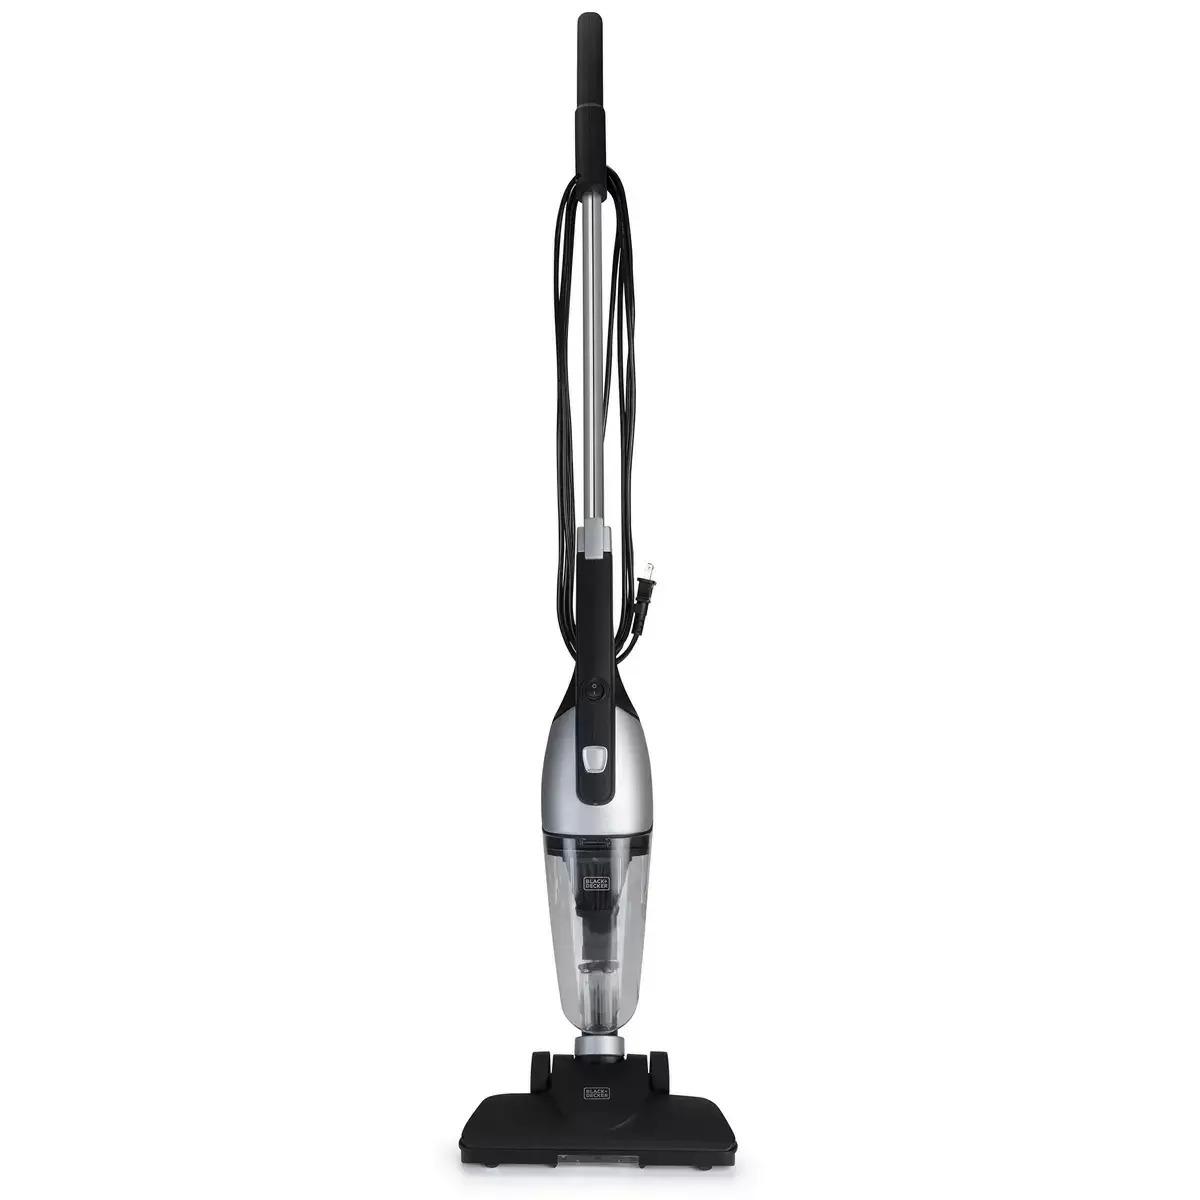 Black + Decker 3-in-1 Corded Upright and Handheld Vacuum for $15